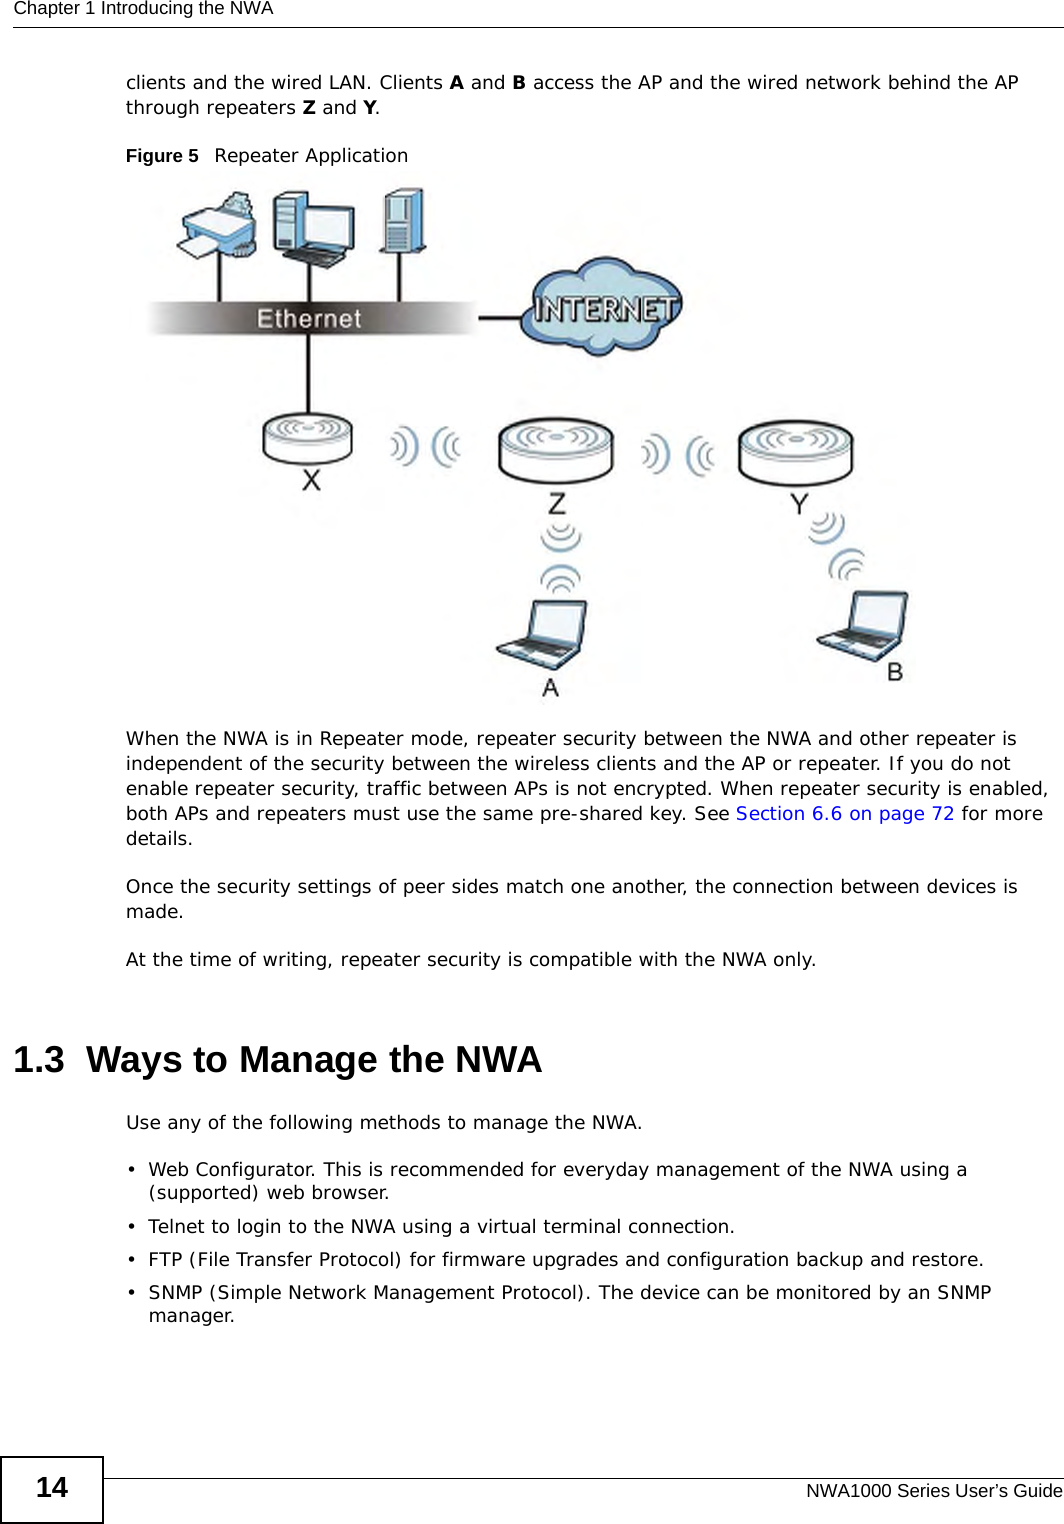 Chapter 1 Introducing the NWANWA1000 Series User’s Guide14clients and the wired LAN. Clients A and B access the AP and the wired network behind the AP through repeaters Z and Y.Figure 5   Repeater ApplicationWhen the NWA is in Repeater mode, repeater security between the NWA and other repeater is independent of the security between the wireless clients and the AP or repeater. If you do not enable repeater security, traffic between APs is not encrypted. When repeater security is enabled, both APs and repeaters must use the same pre-shared key. See Section 6.6 on page 72 for more details. Once the security settings of peer sides match one another, the connection between devices is made.At the time of writing, repeater security is compatible with the NWA only. 1.3  Ways to Manage the NWAUse any of the following methods to manage the NWA.• Web Configurator. This is recommended for everyday management of the NWA using a (supported) web browser.• Telnet to login to the NWA using a virtual terminal connection.• FTP (File Transfer Protocol) for firmware upgrades and configuration backup and restore.• SNMP (Simple Network Management Protocol). The device can be monitored by an SNMP manager.